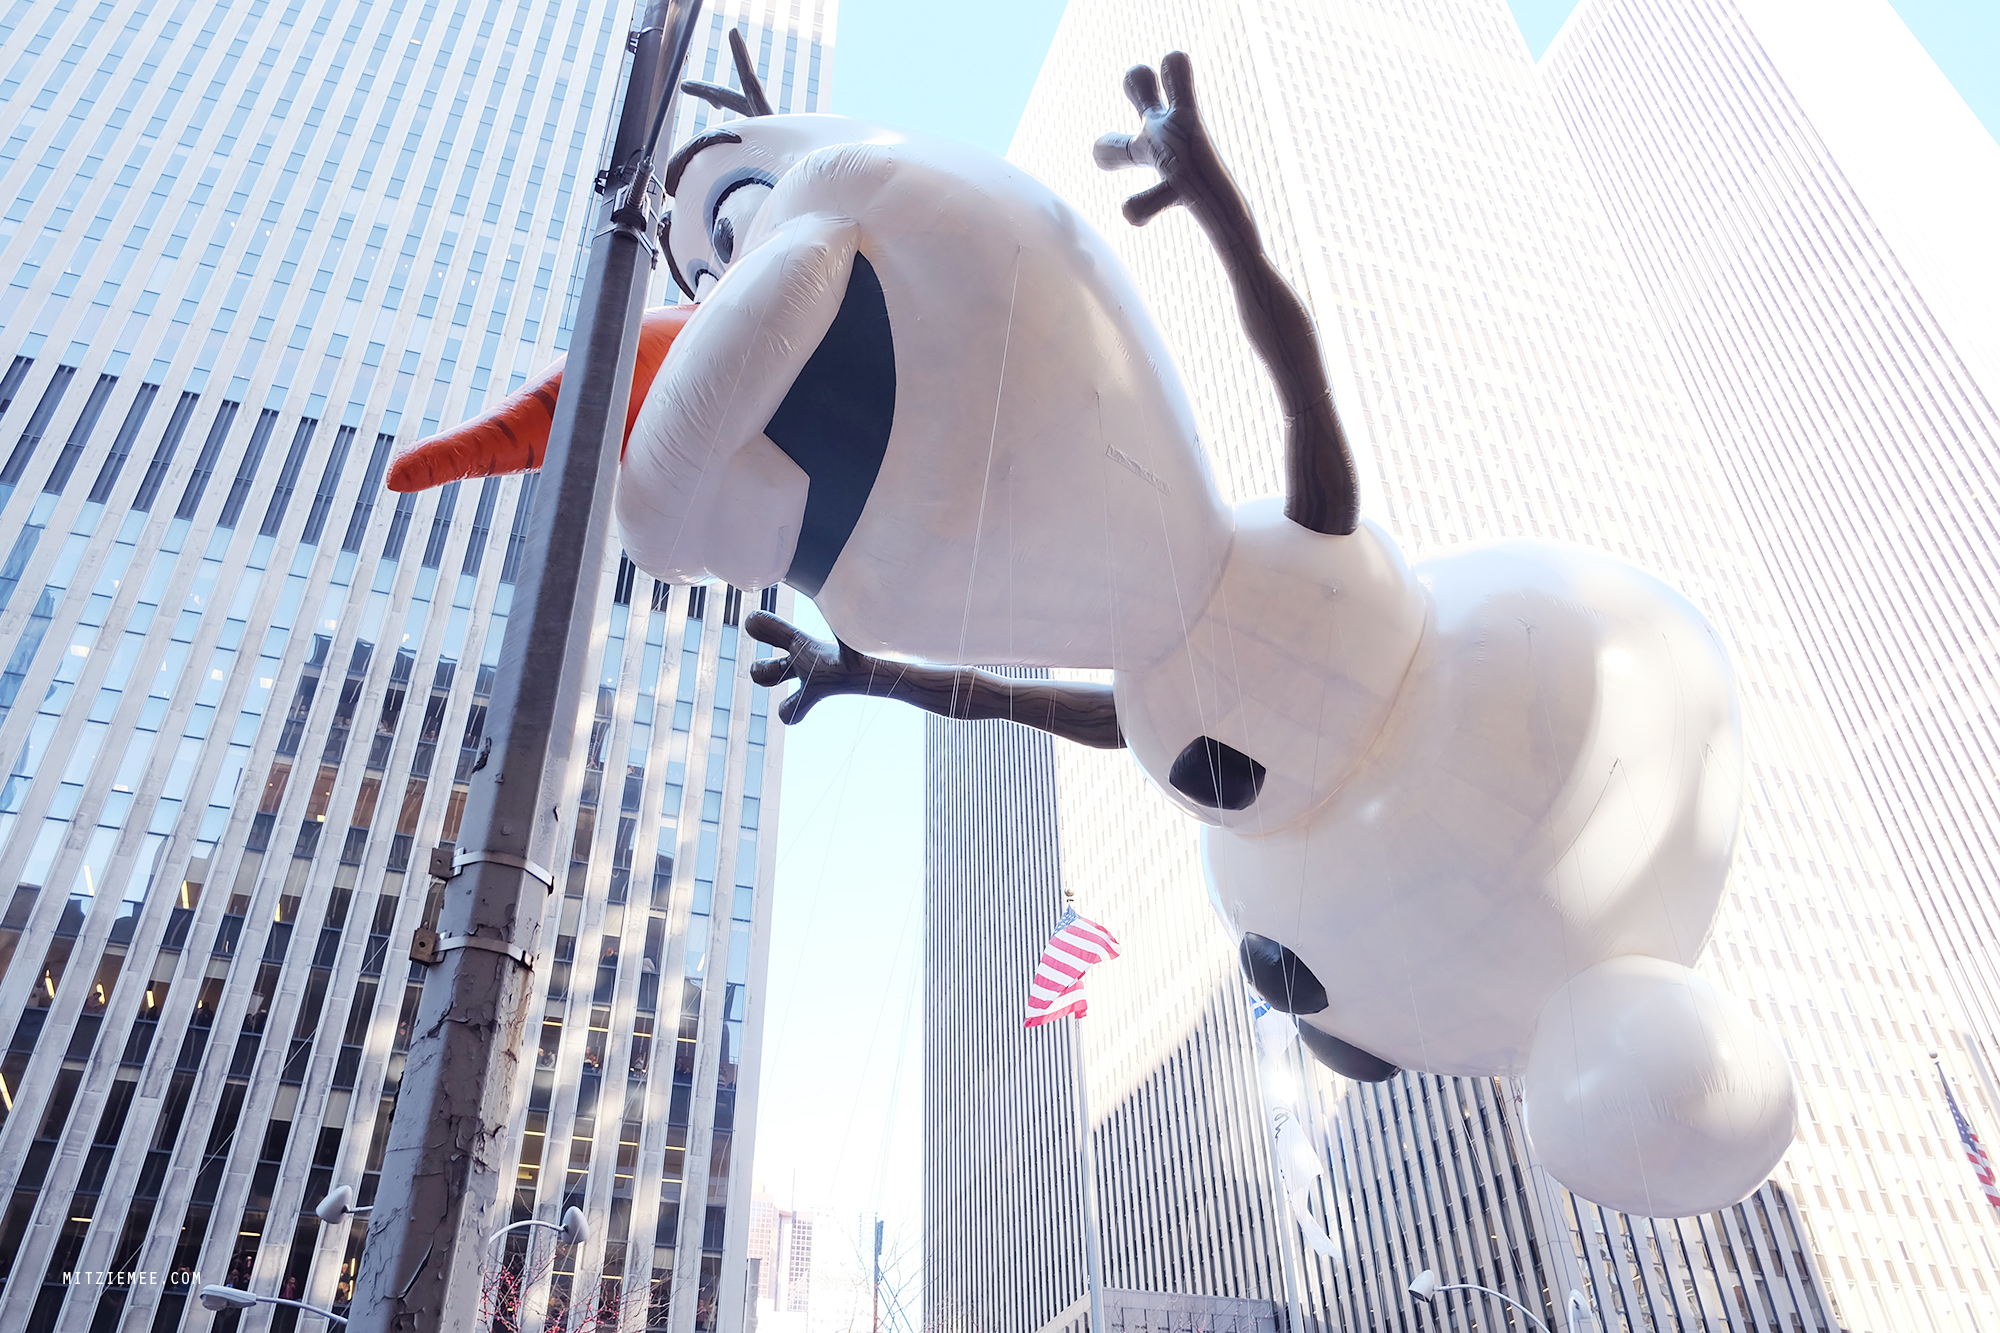 Olaf at Macy's Thanksgiving Day Parade, New York City